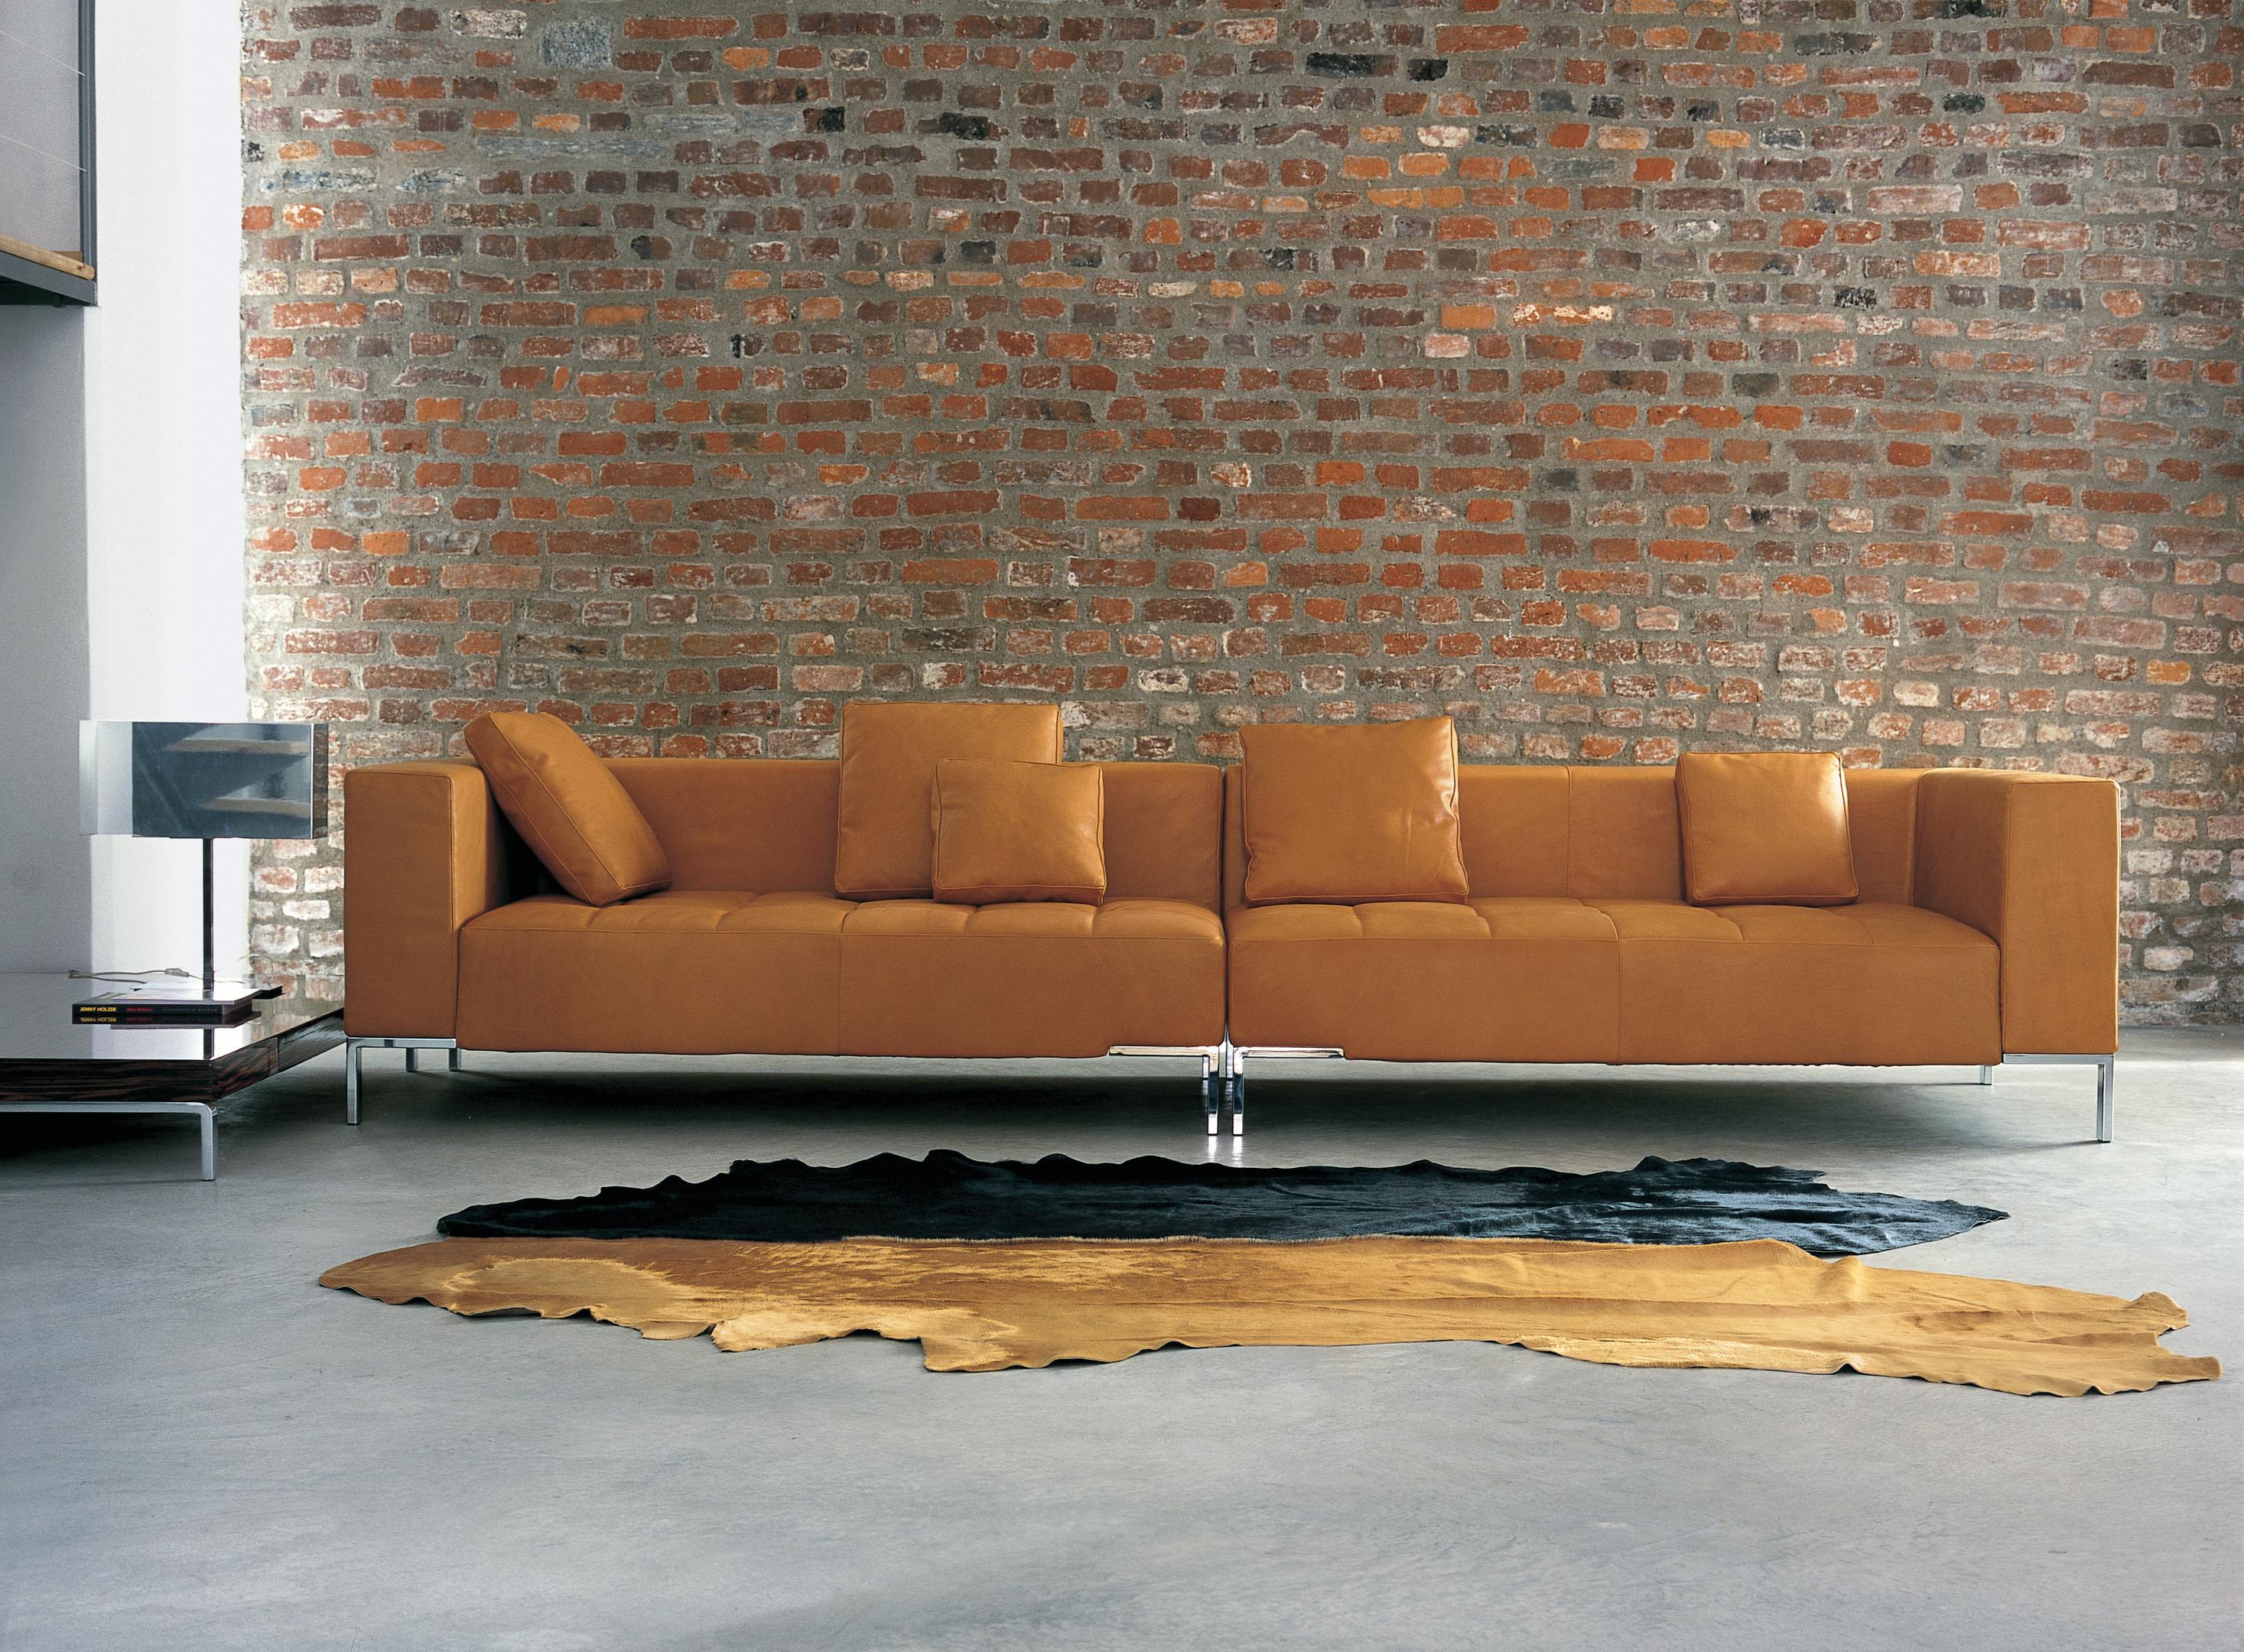 Zanotta Alfa Modular Sofa in Teolo Red Fabric with Steel Frame by Emaf Progetti

These modular elements allow many corner or straight compositions. 

Upholstery in polyurethane/Dacron Du Pont or 100% new goose down. Fixed internal cotton cover.